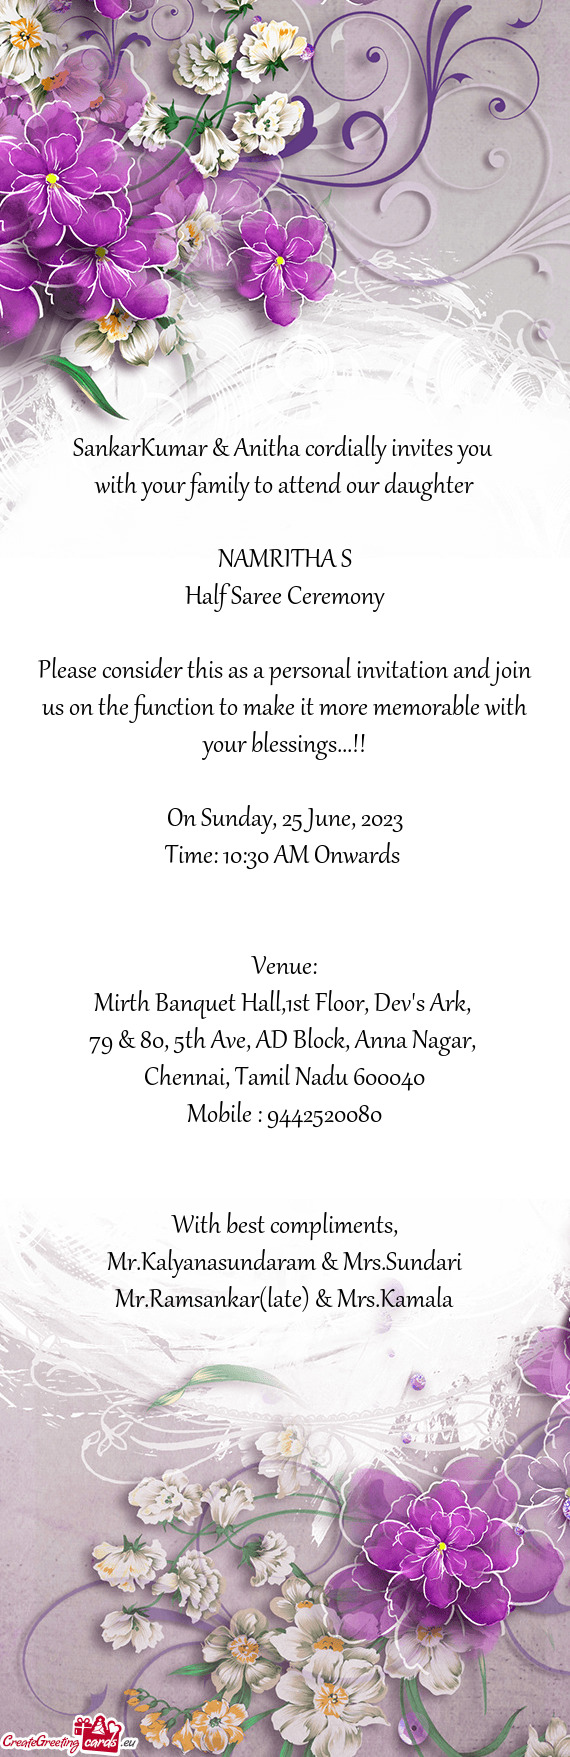 SankarKumar & Anitha cordially invites you with your family to attend our daughter NAMRITHA S